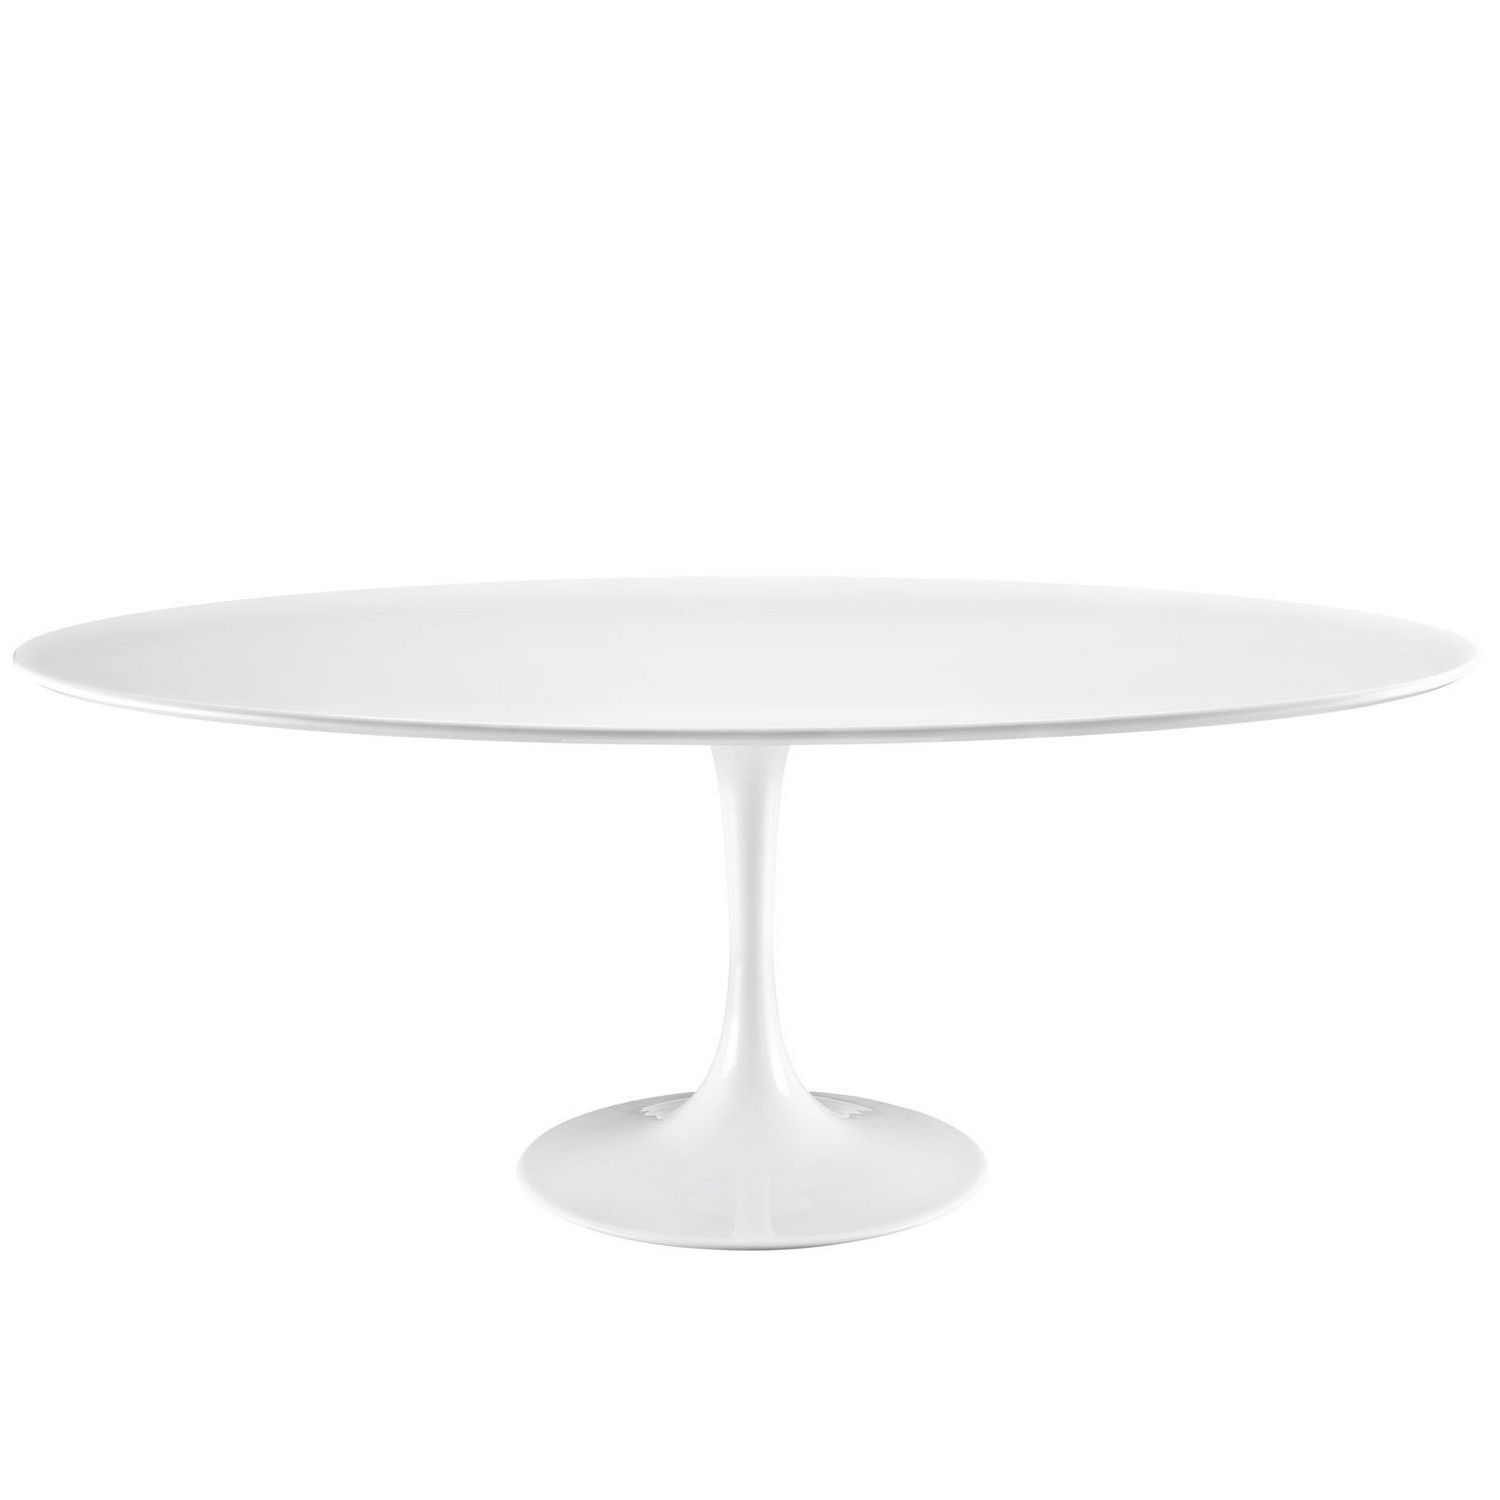 Modway Lippa 78 Wood Top Dining Table - White